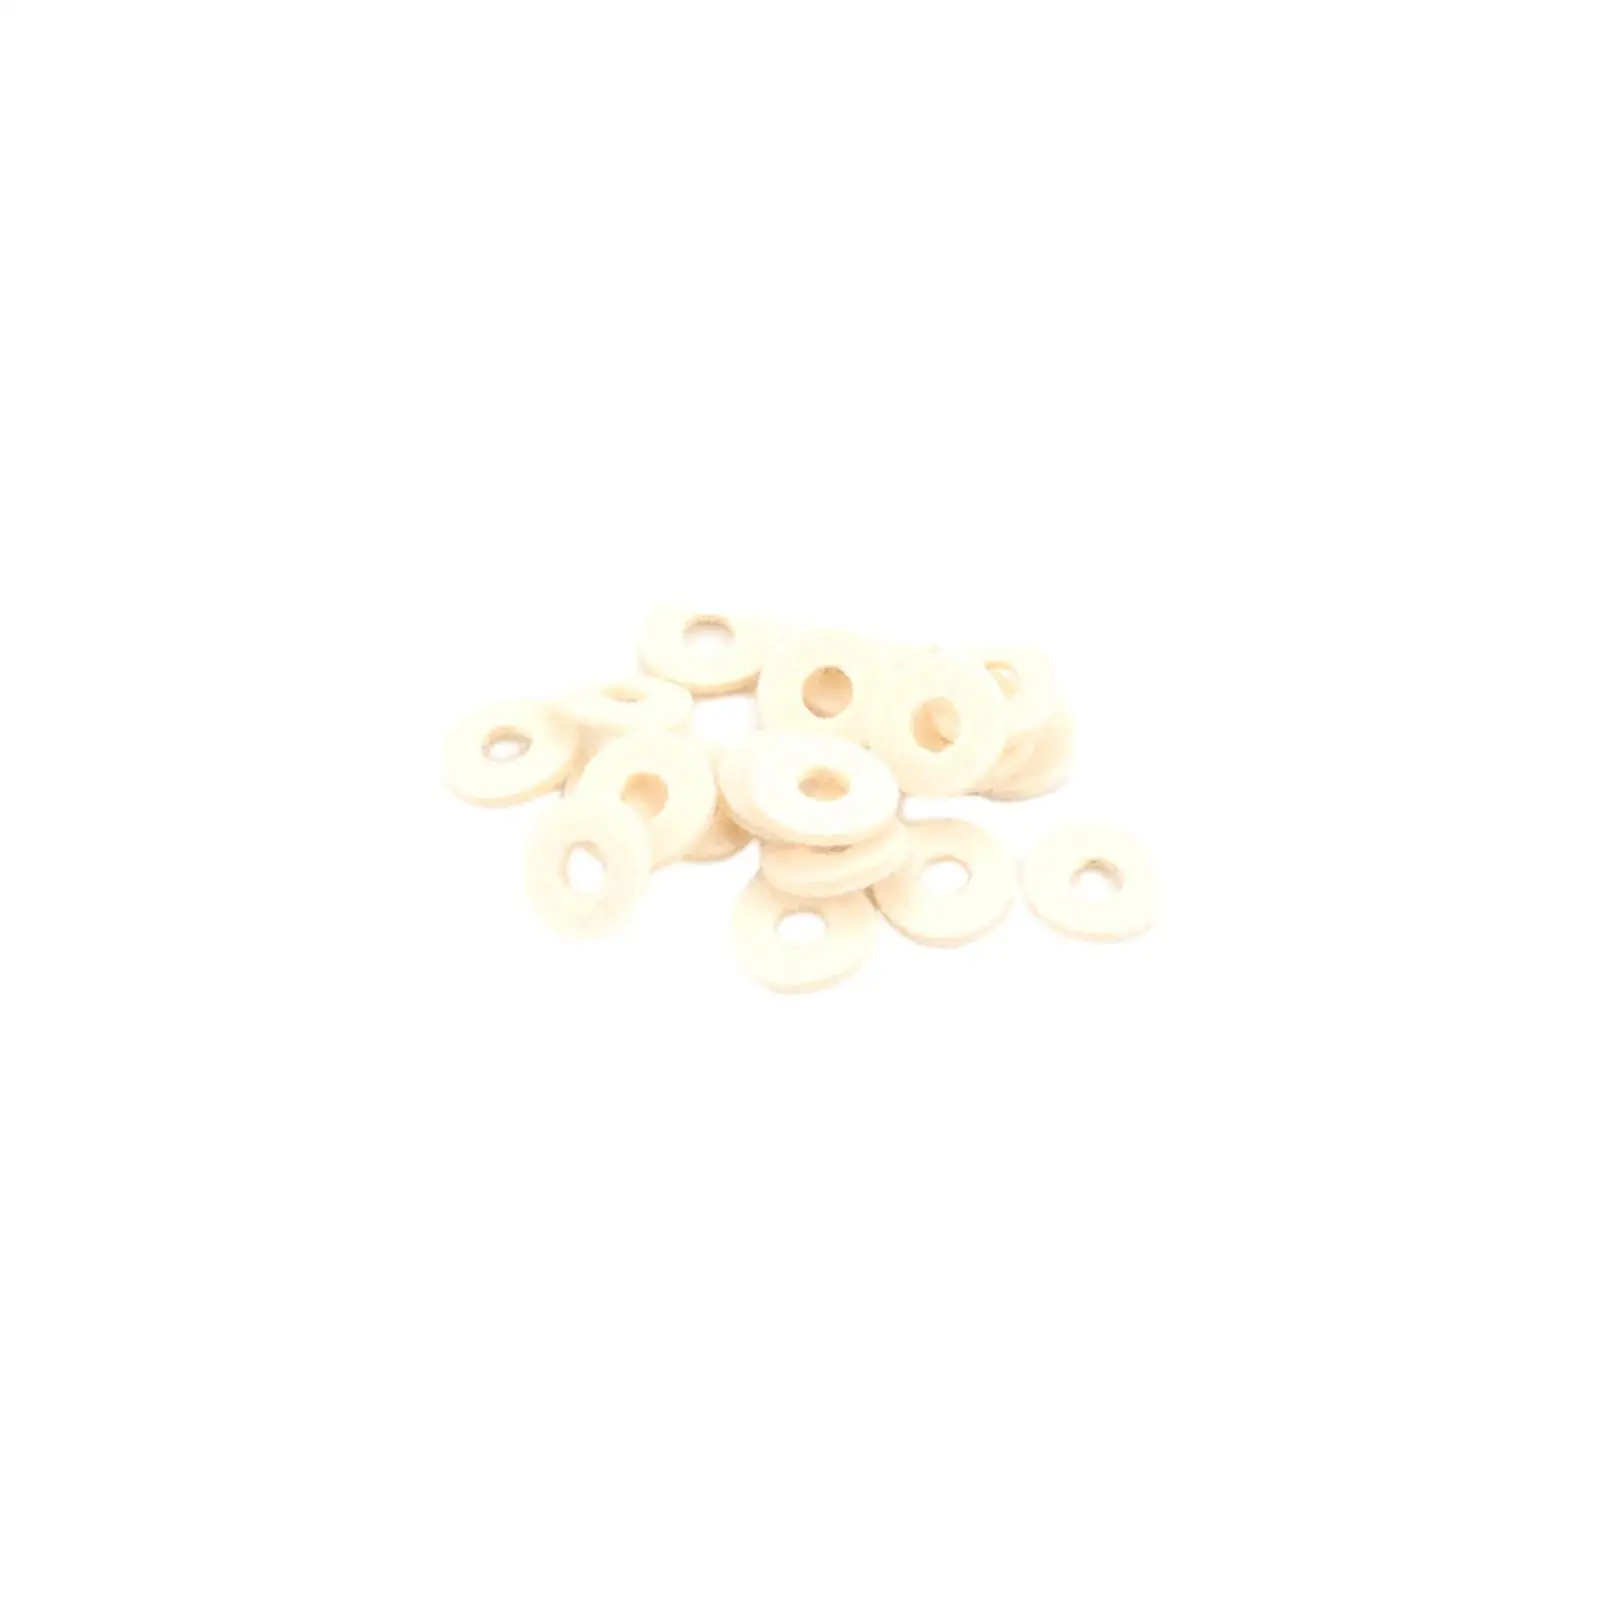 20x Trumpet Felt Washer Cushion Pad Durable Replacement Part Set Musical Instruments Accessories